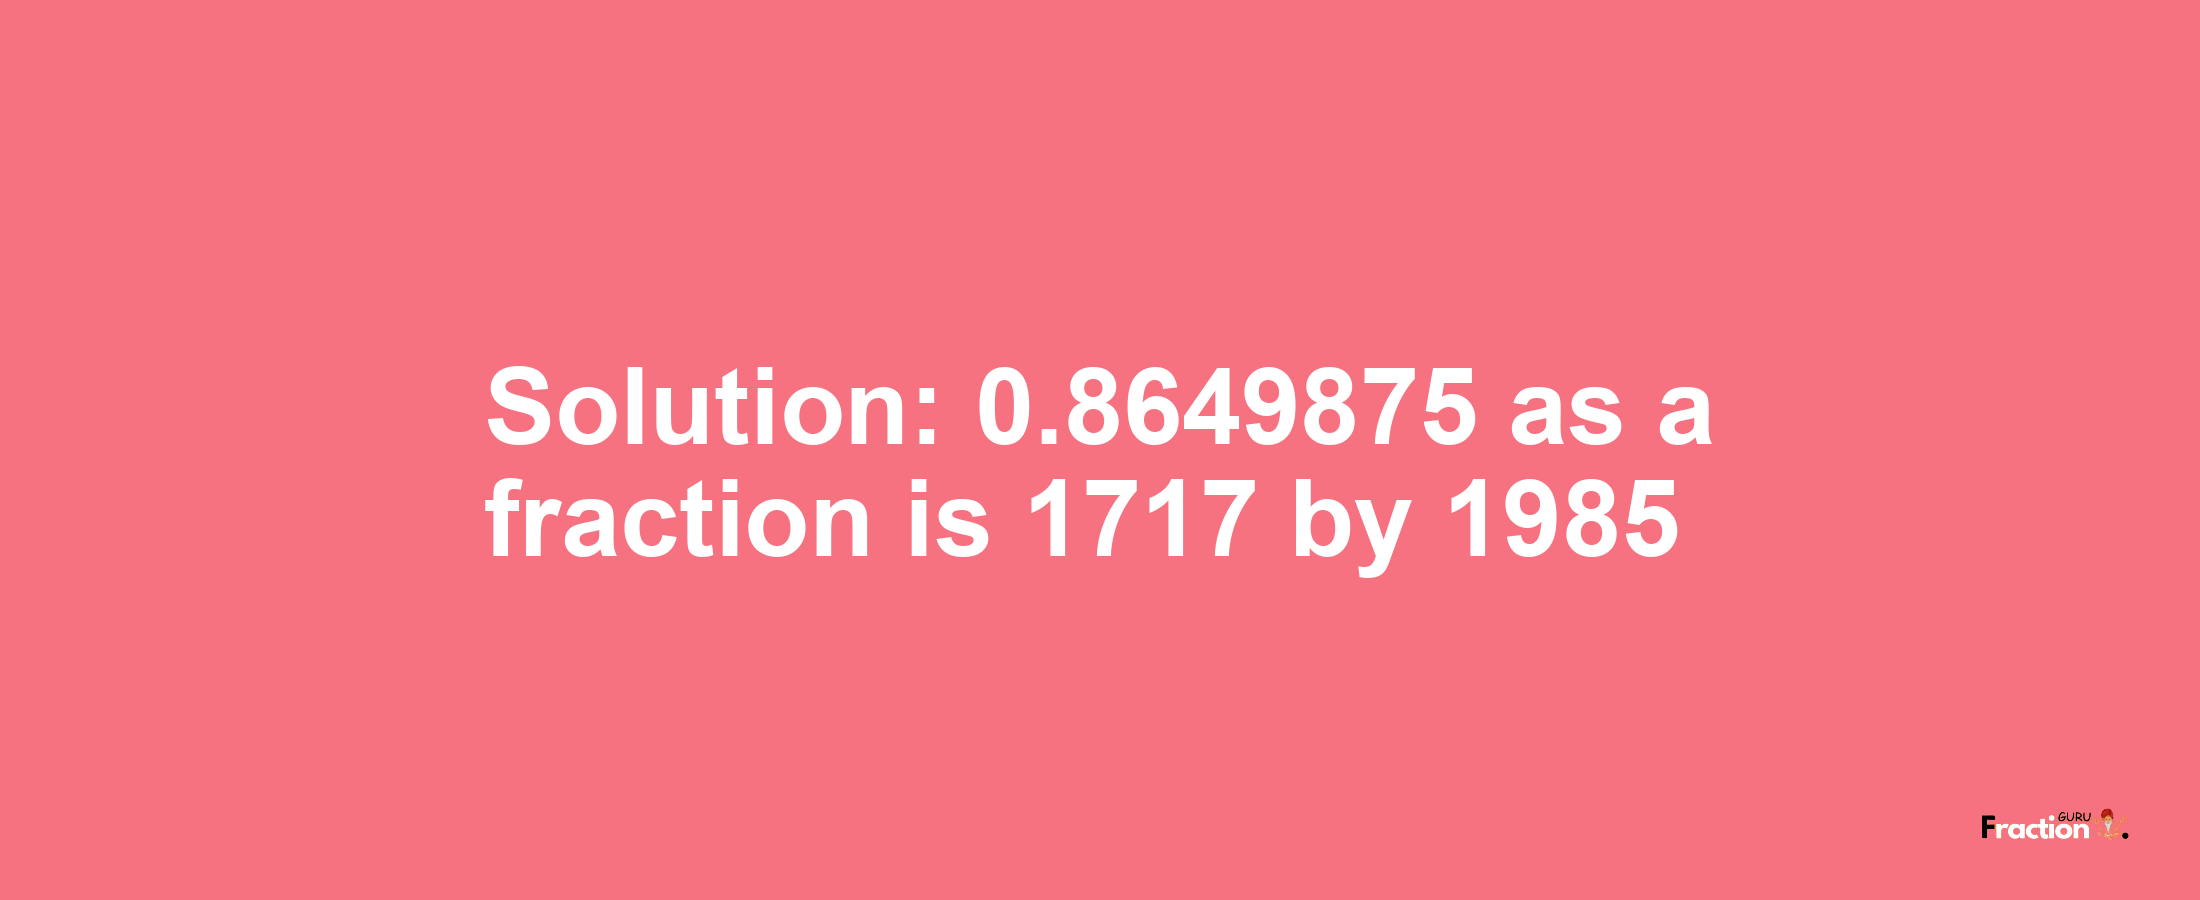 Solution:0.8649875 as a fraction is 1717/1985